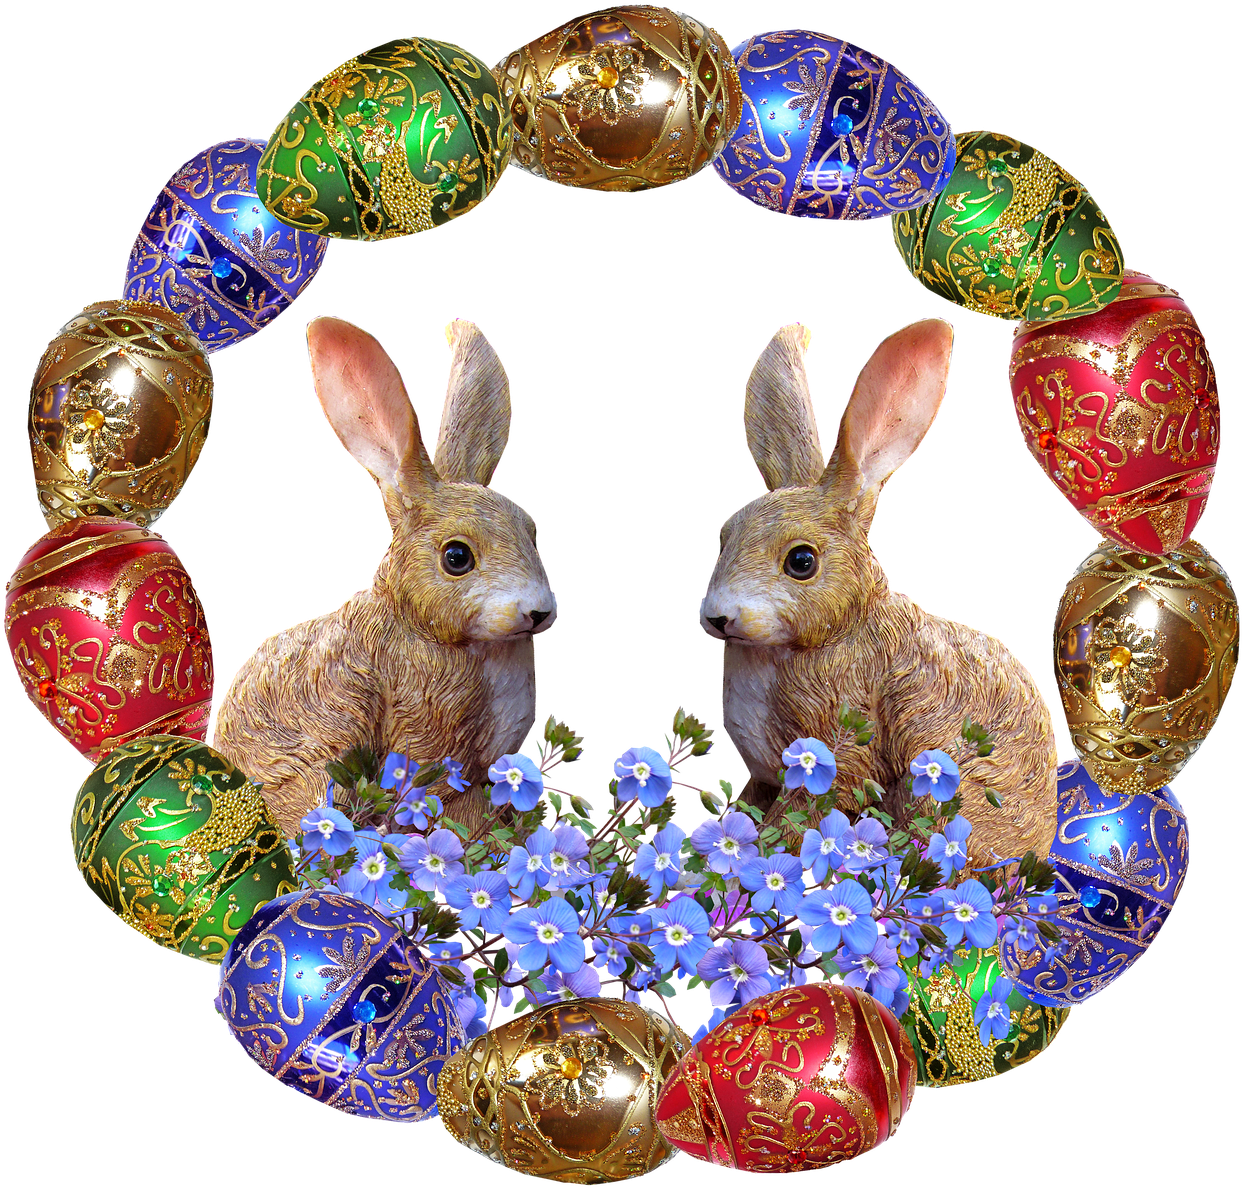 Two Rabbits In A Wreath Of Eggs